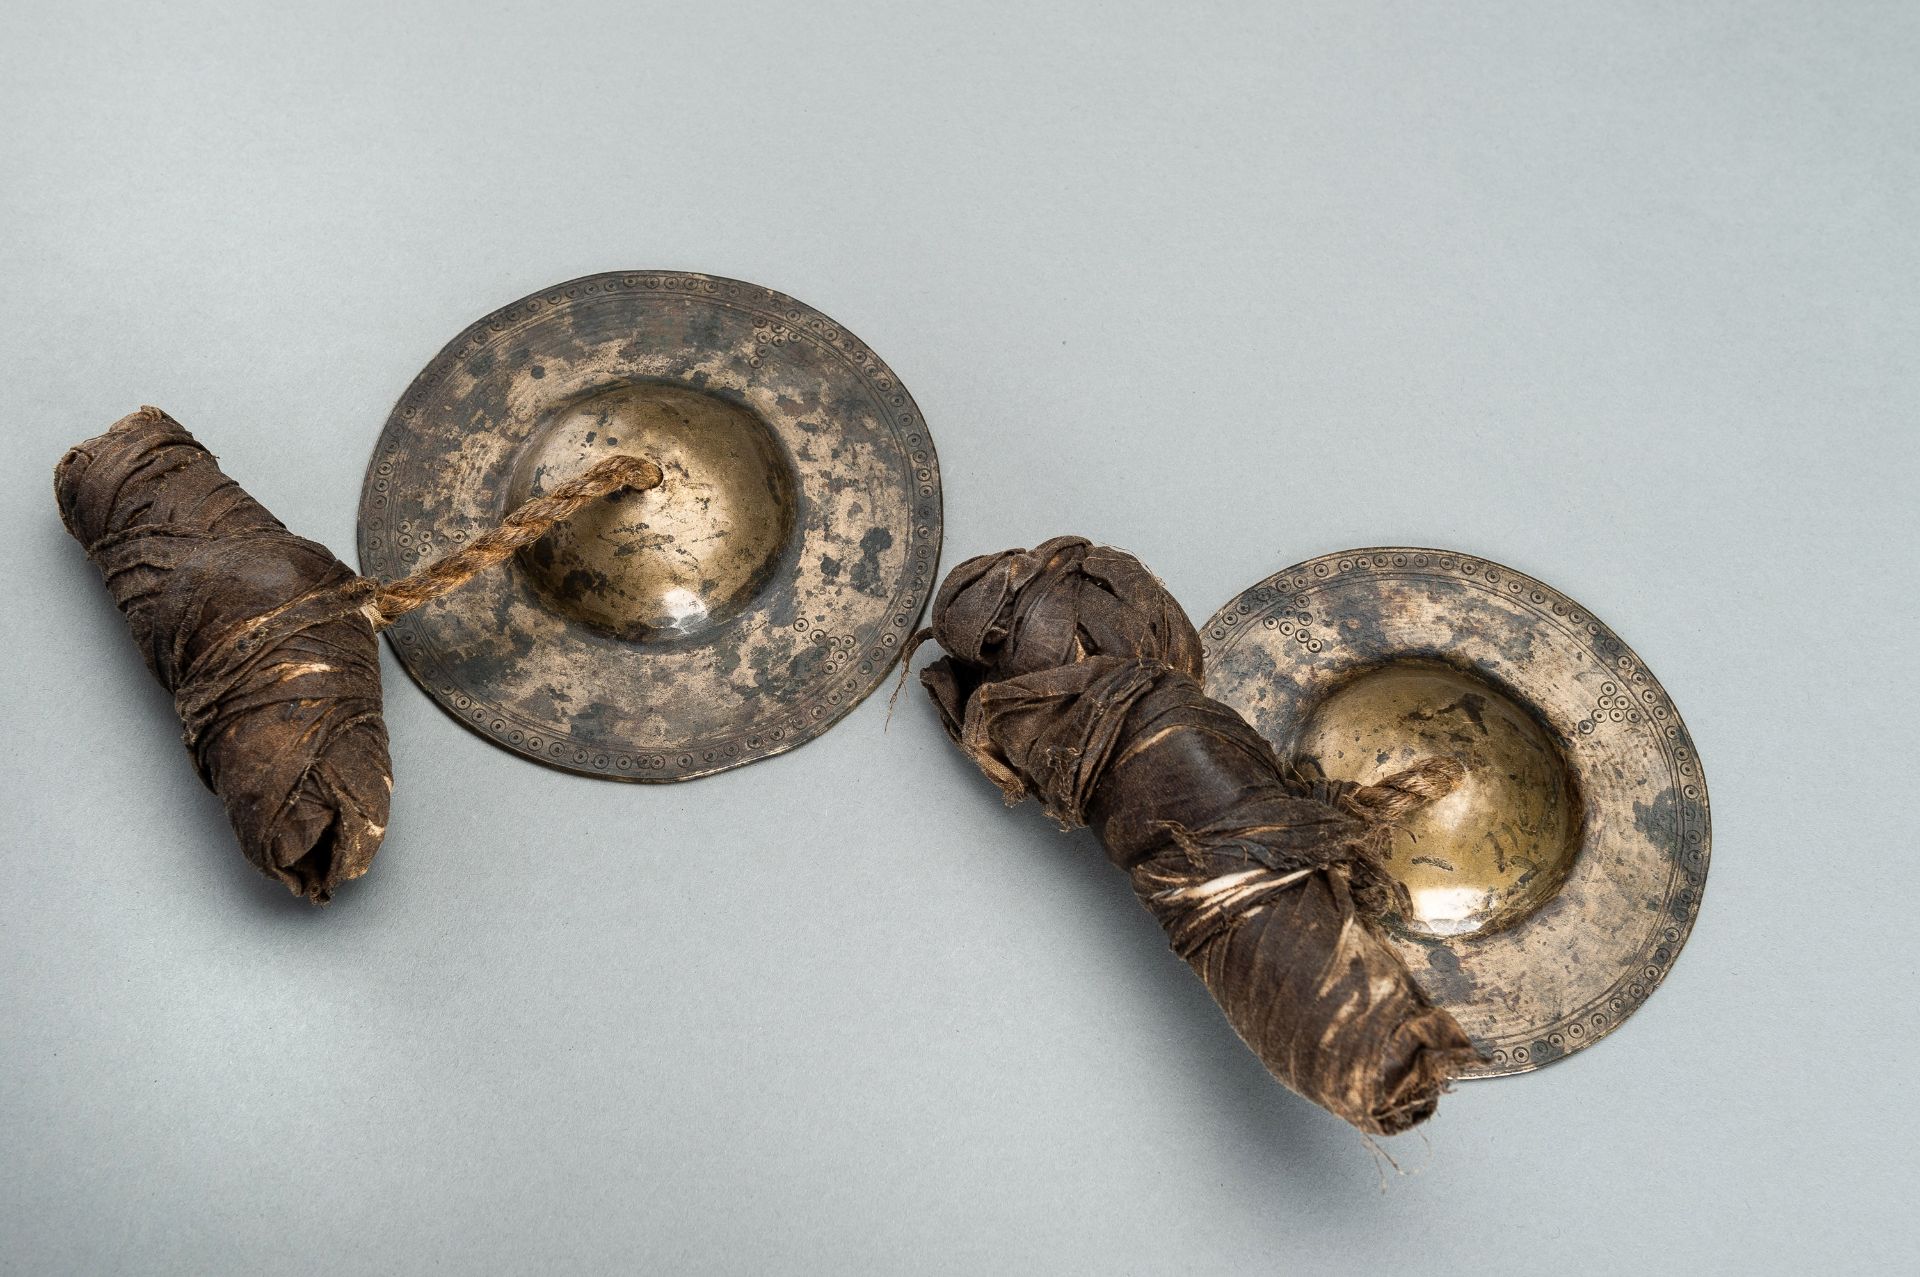 A RARE PAIR OF BRONZE CYMBALS, 19th CENTURY - Image 10 of 10